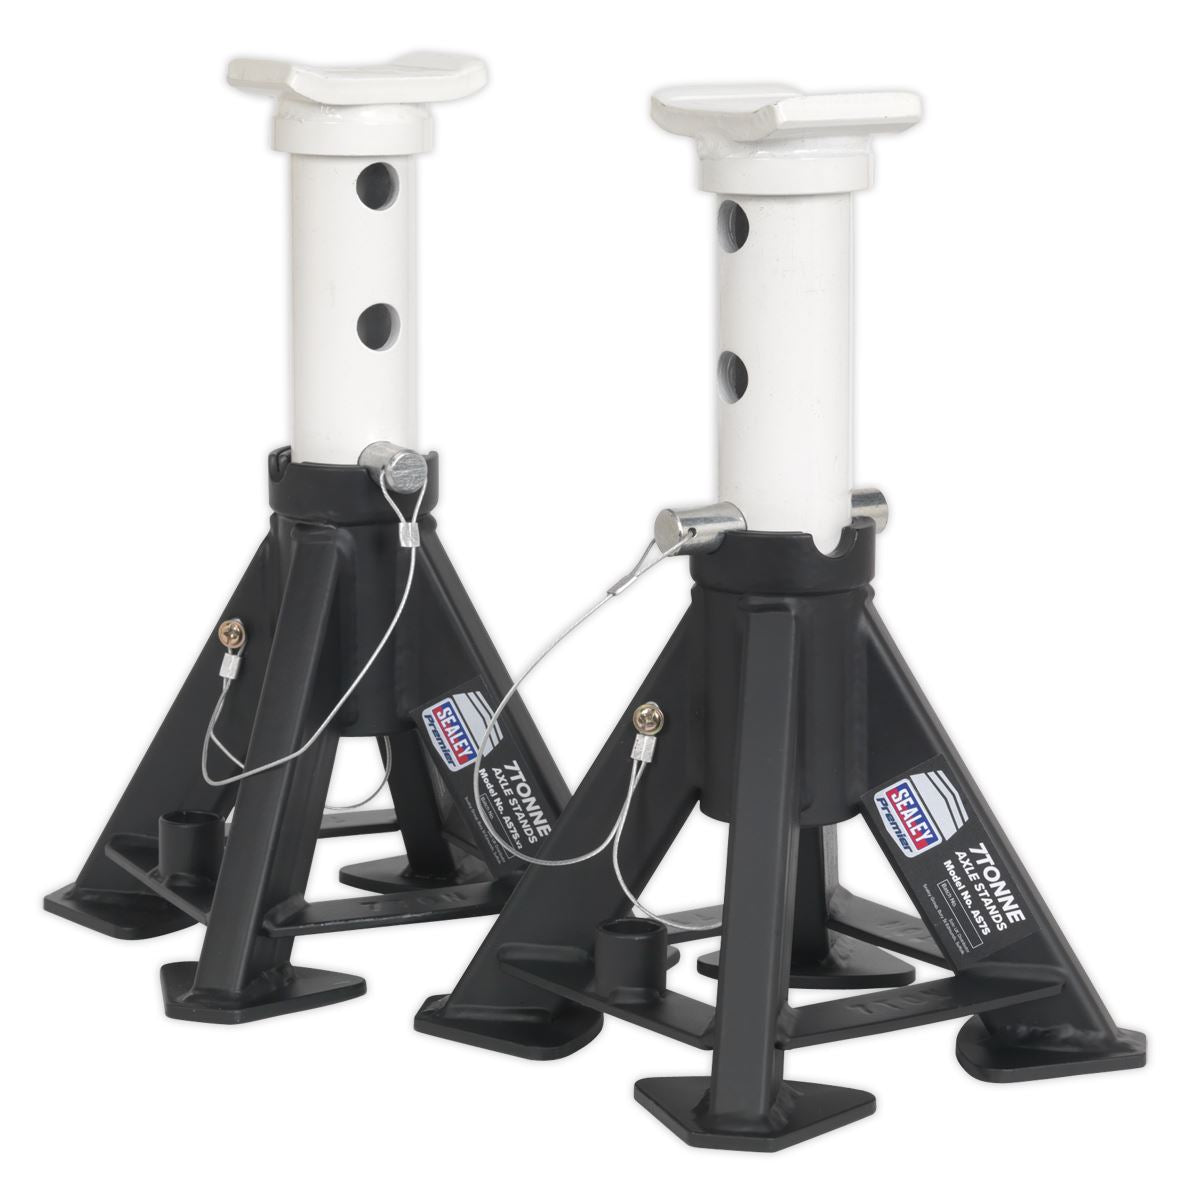 Sealey Premier Short Axle Stands (Pair) 7 Tonne Capacity per Stand